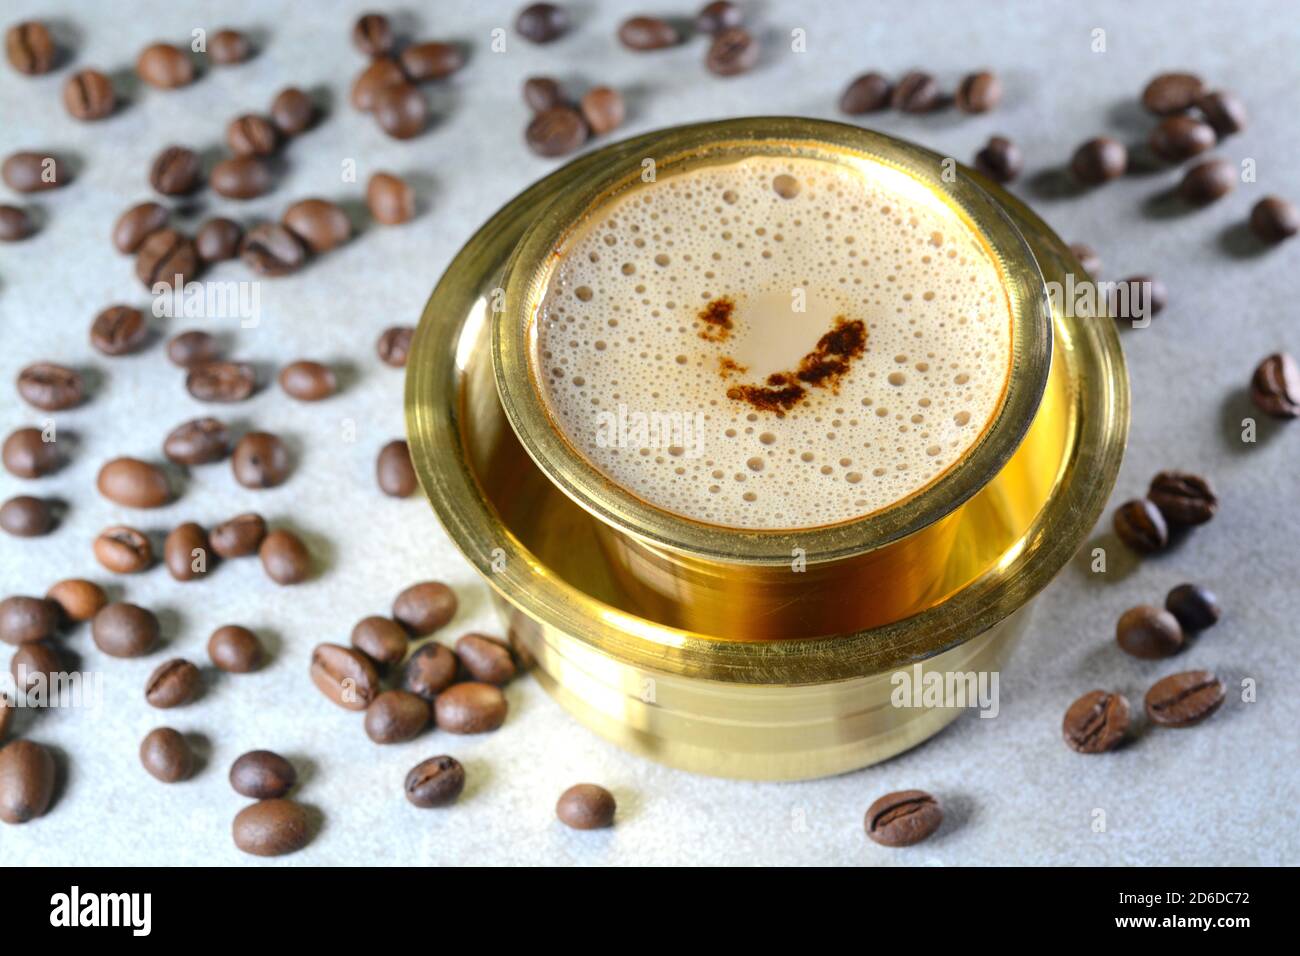 Indian Filter Coffee Photos and Images & Pictures